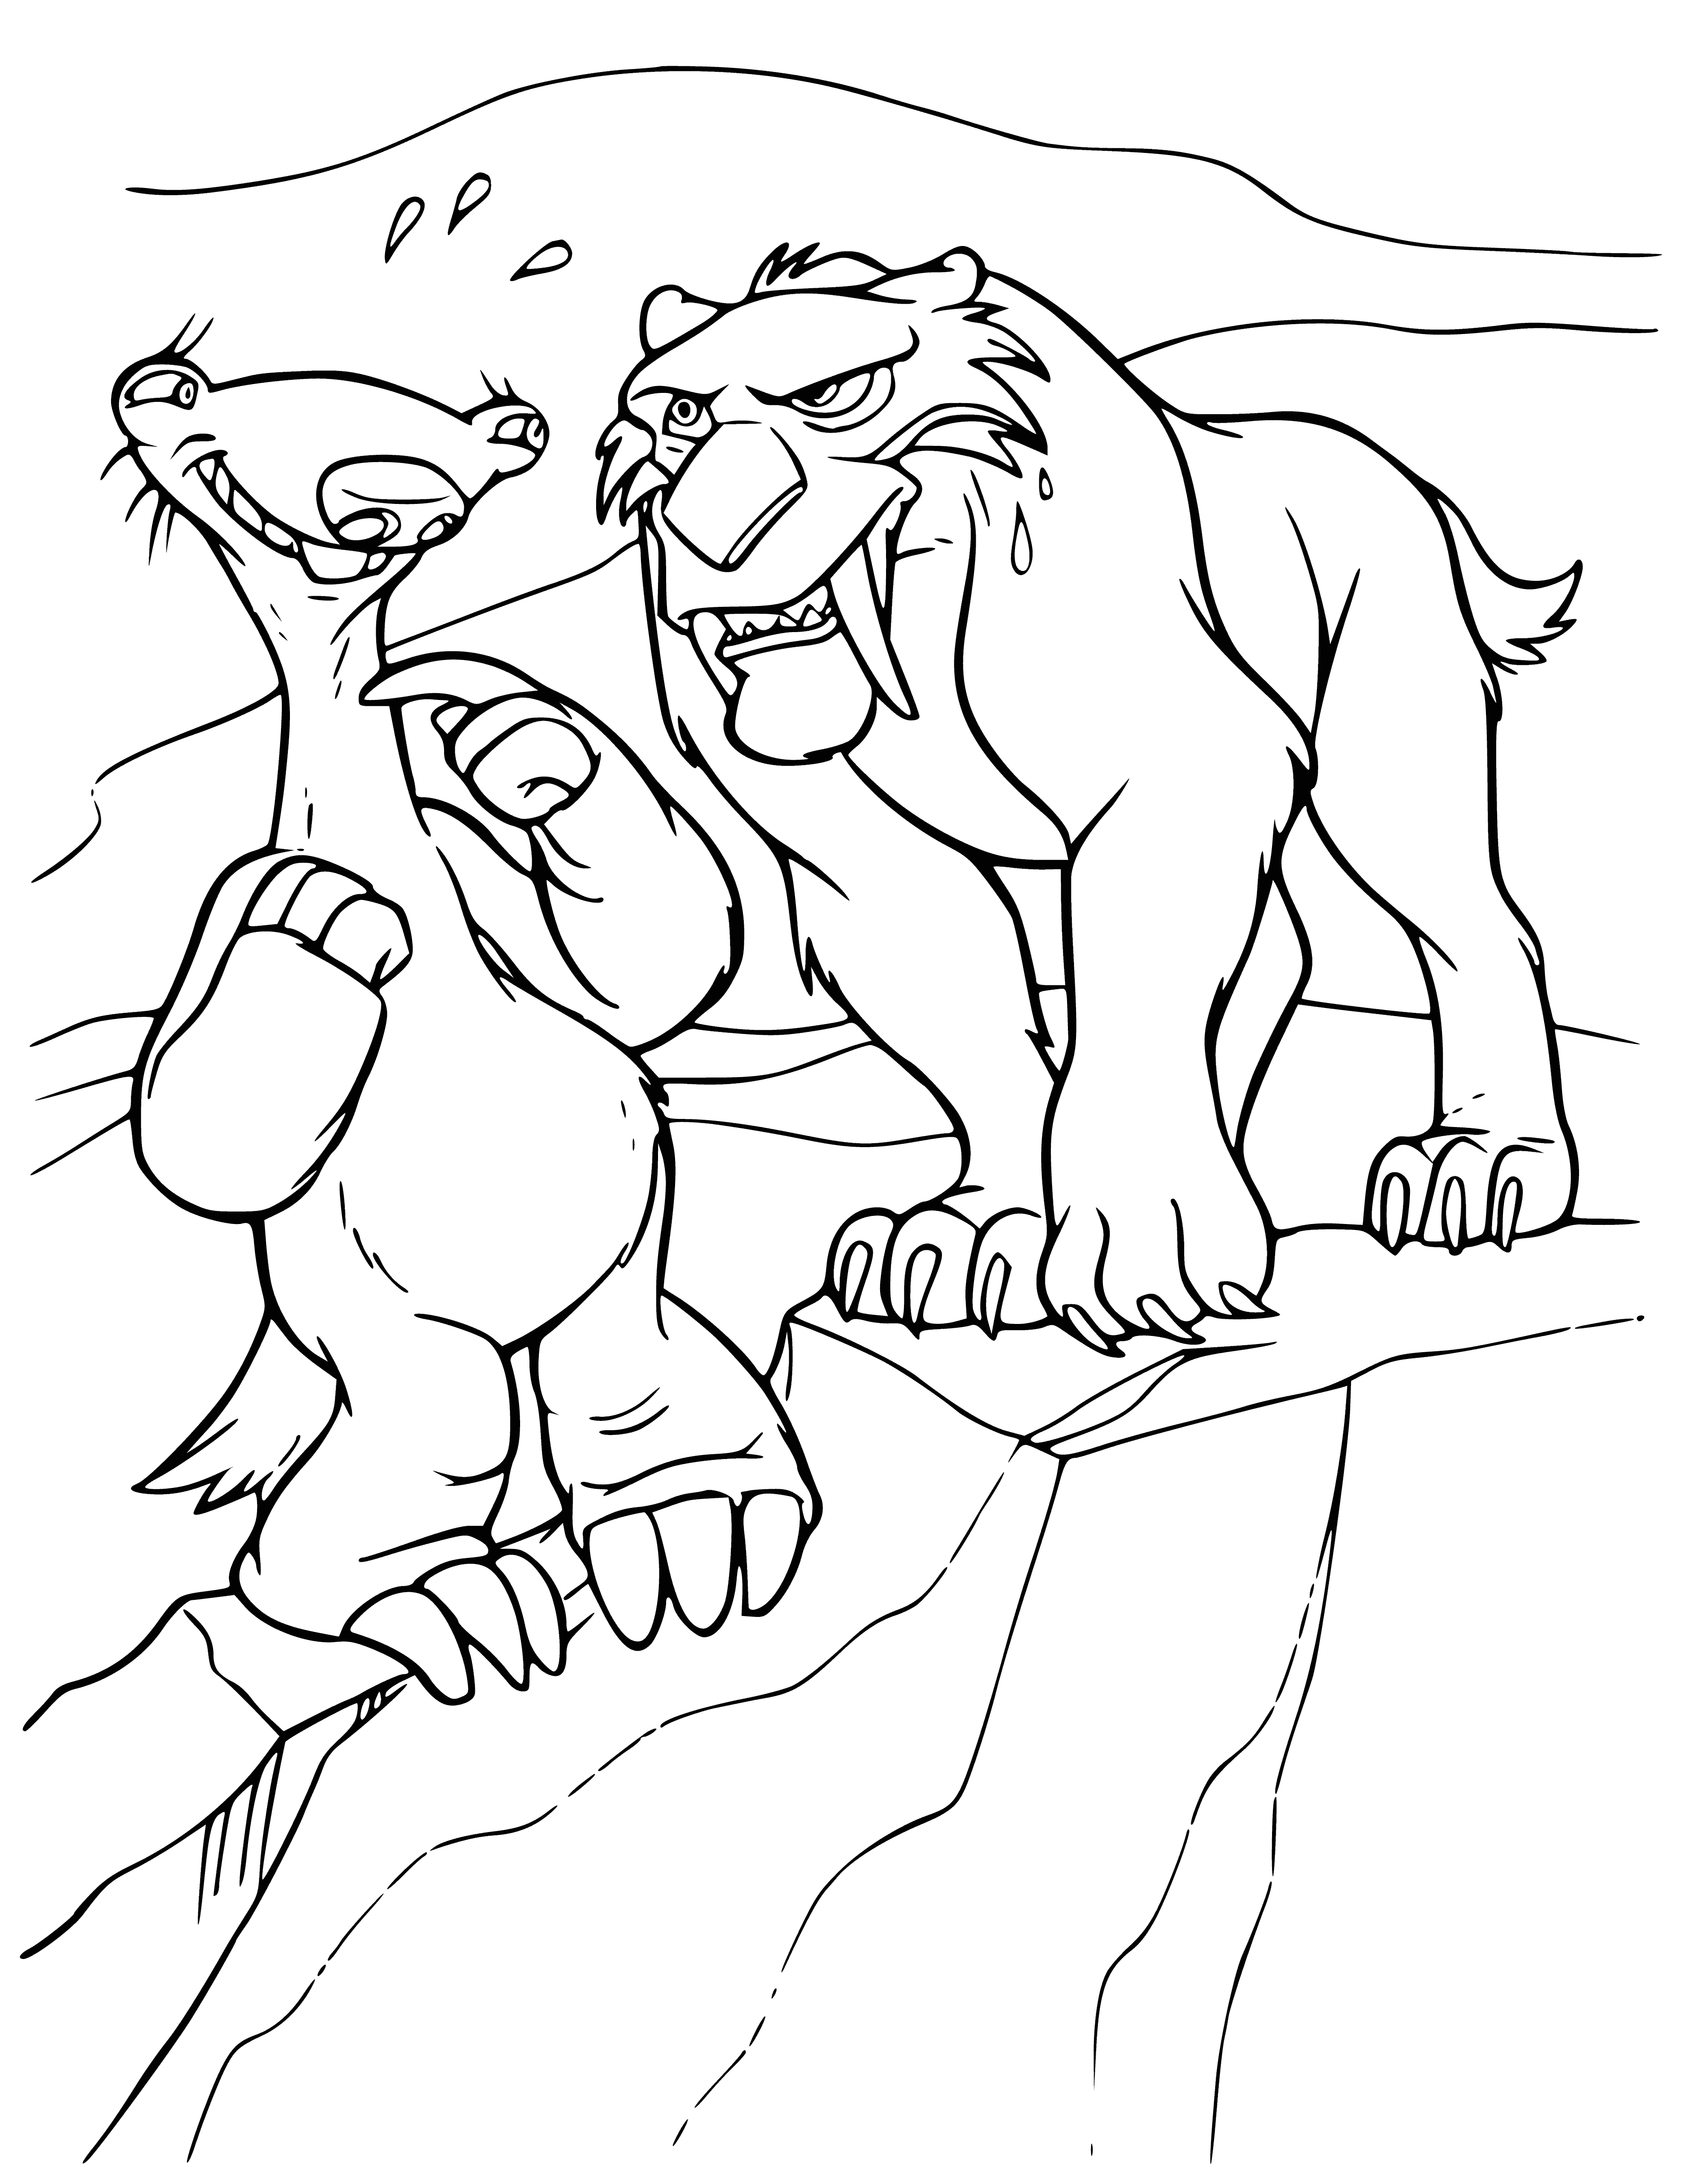 coloring page: Sid and Diego must work together to return the baby to its dad before it's too late.